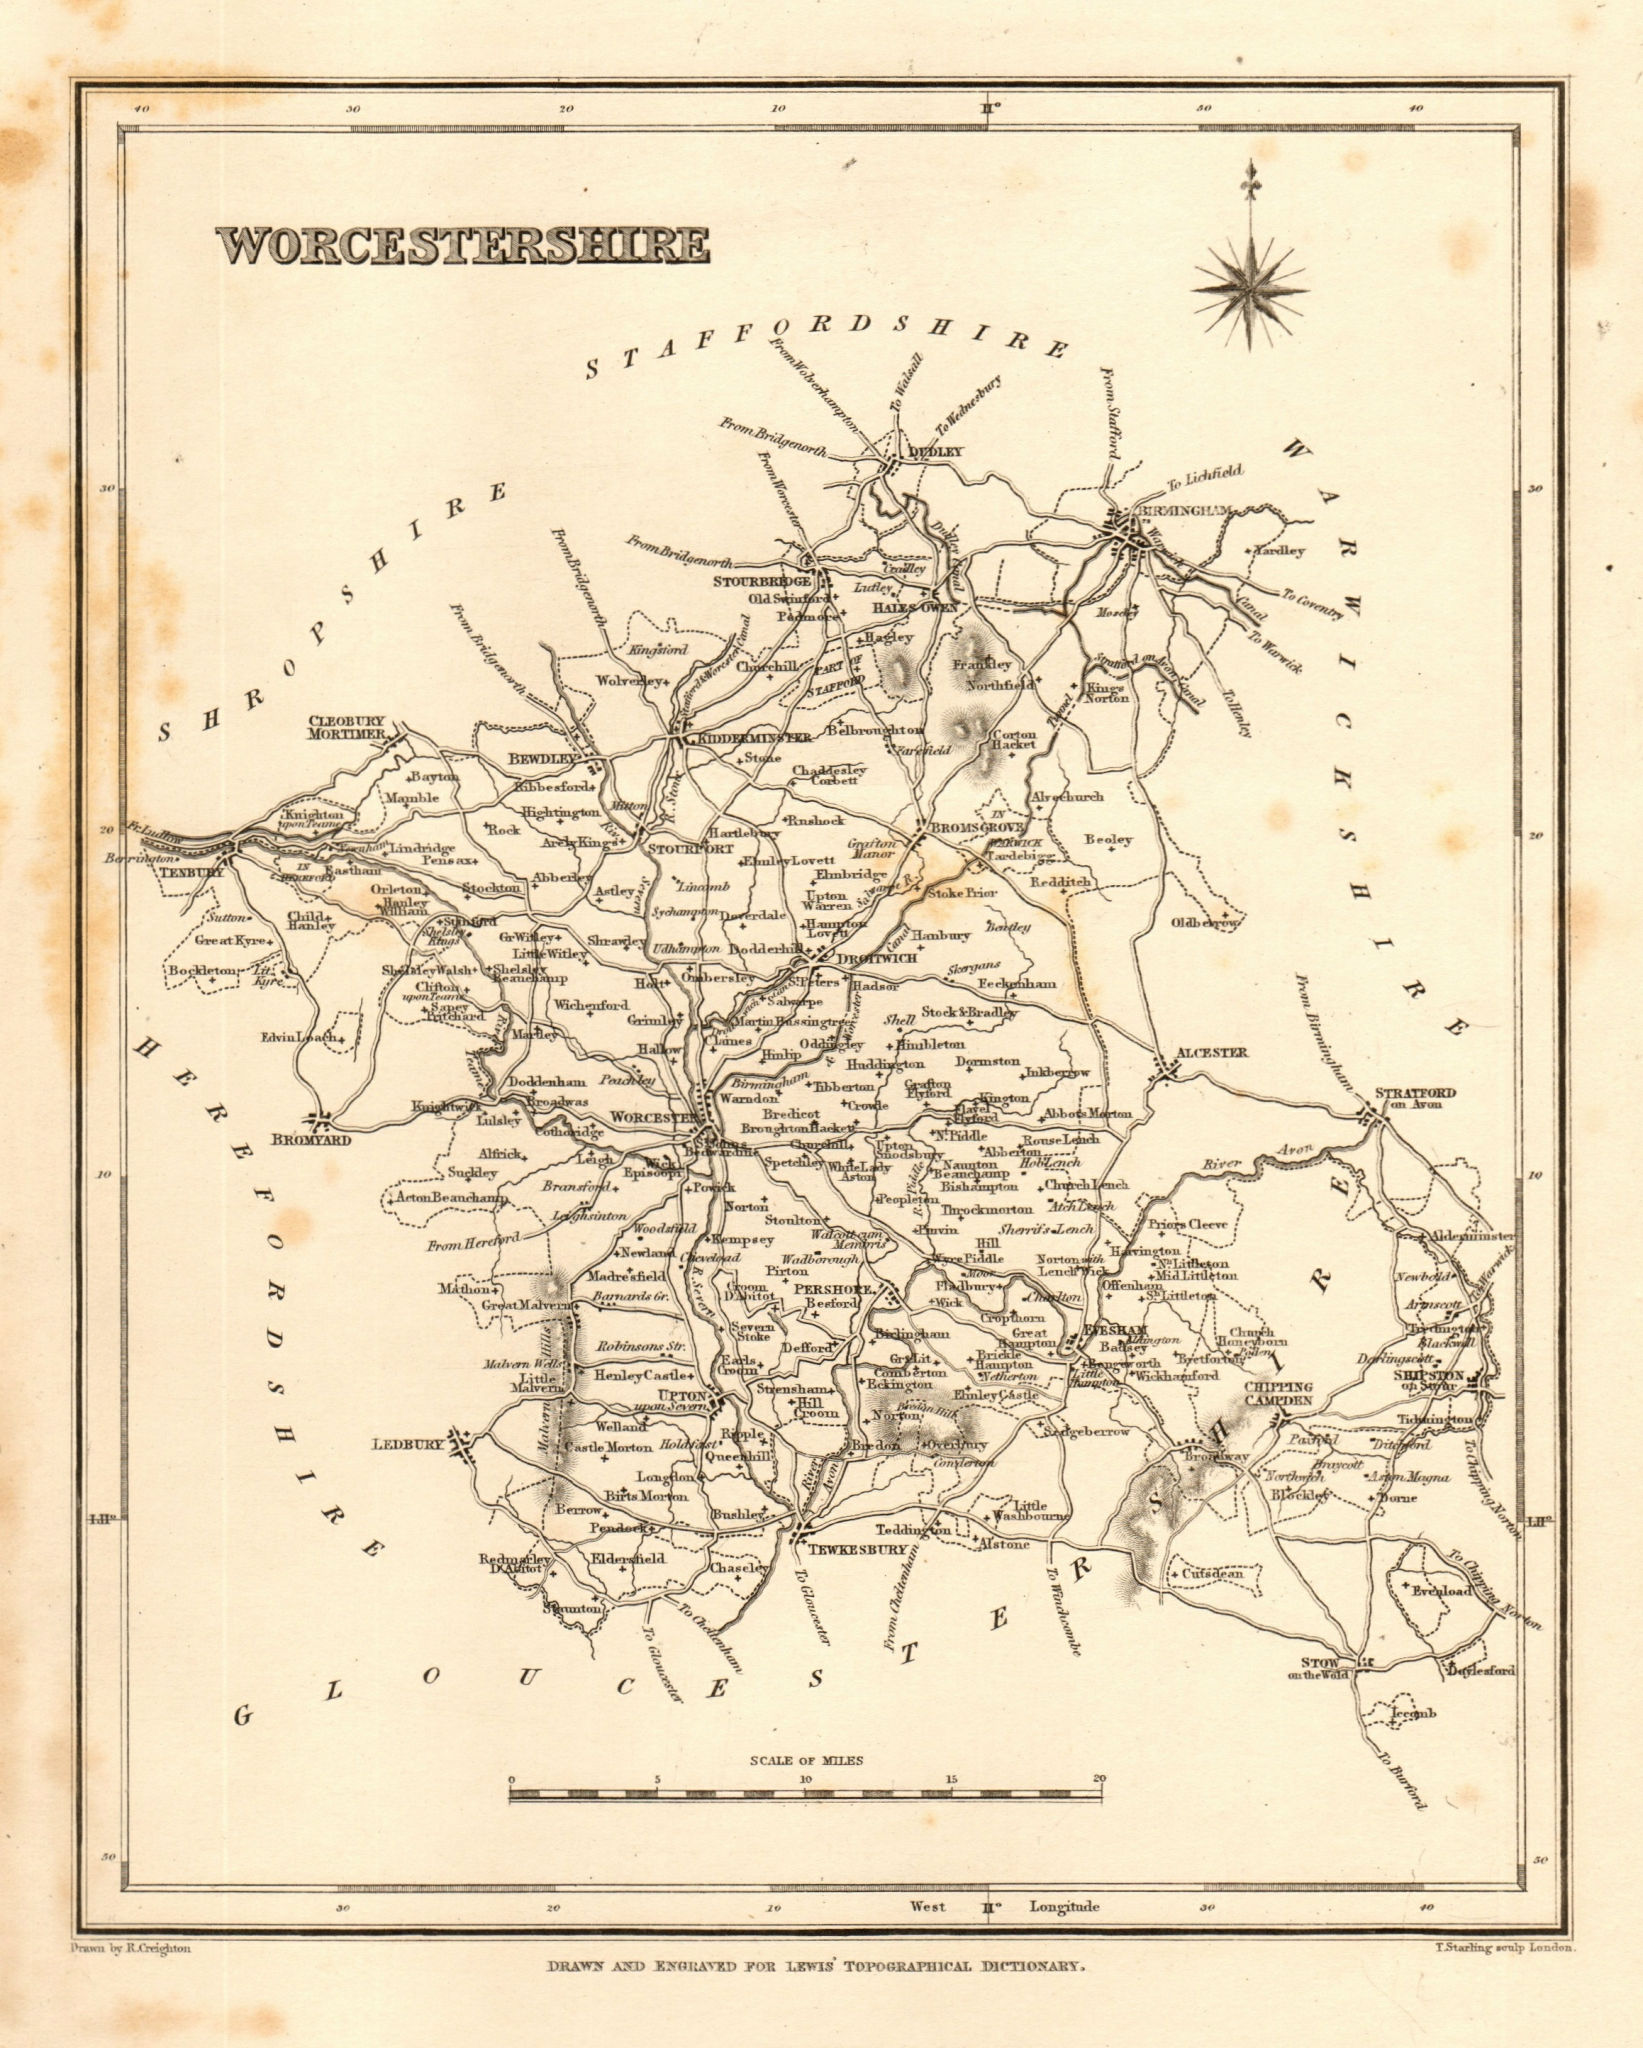 Associate Product Antique county map of WORCESTERSHIRE by Starling & Creighton for Lewis c1840